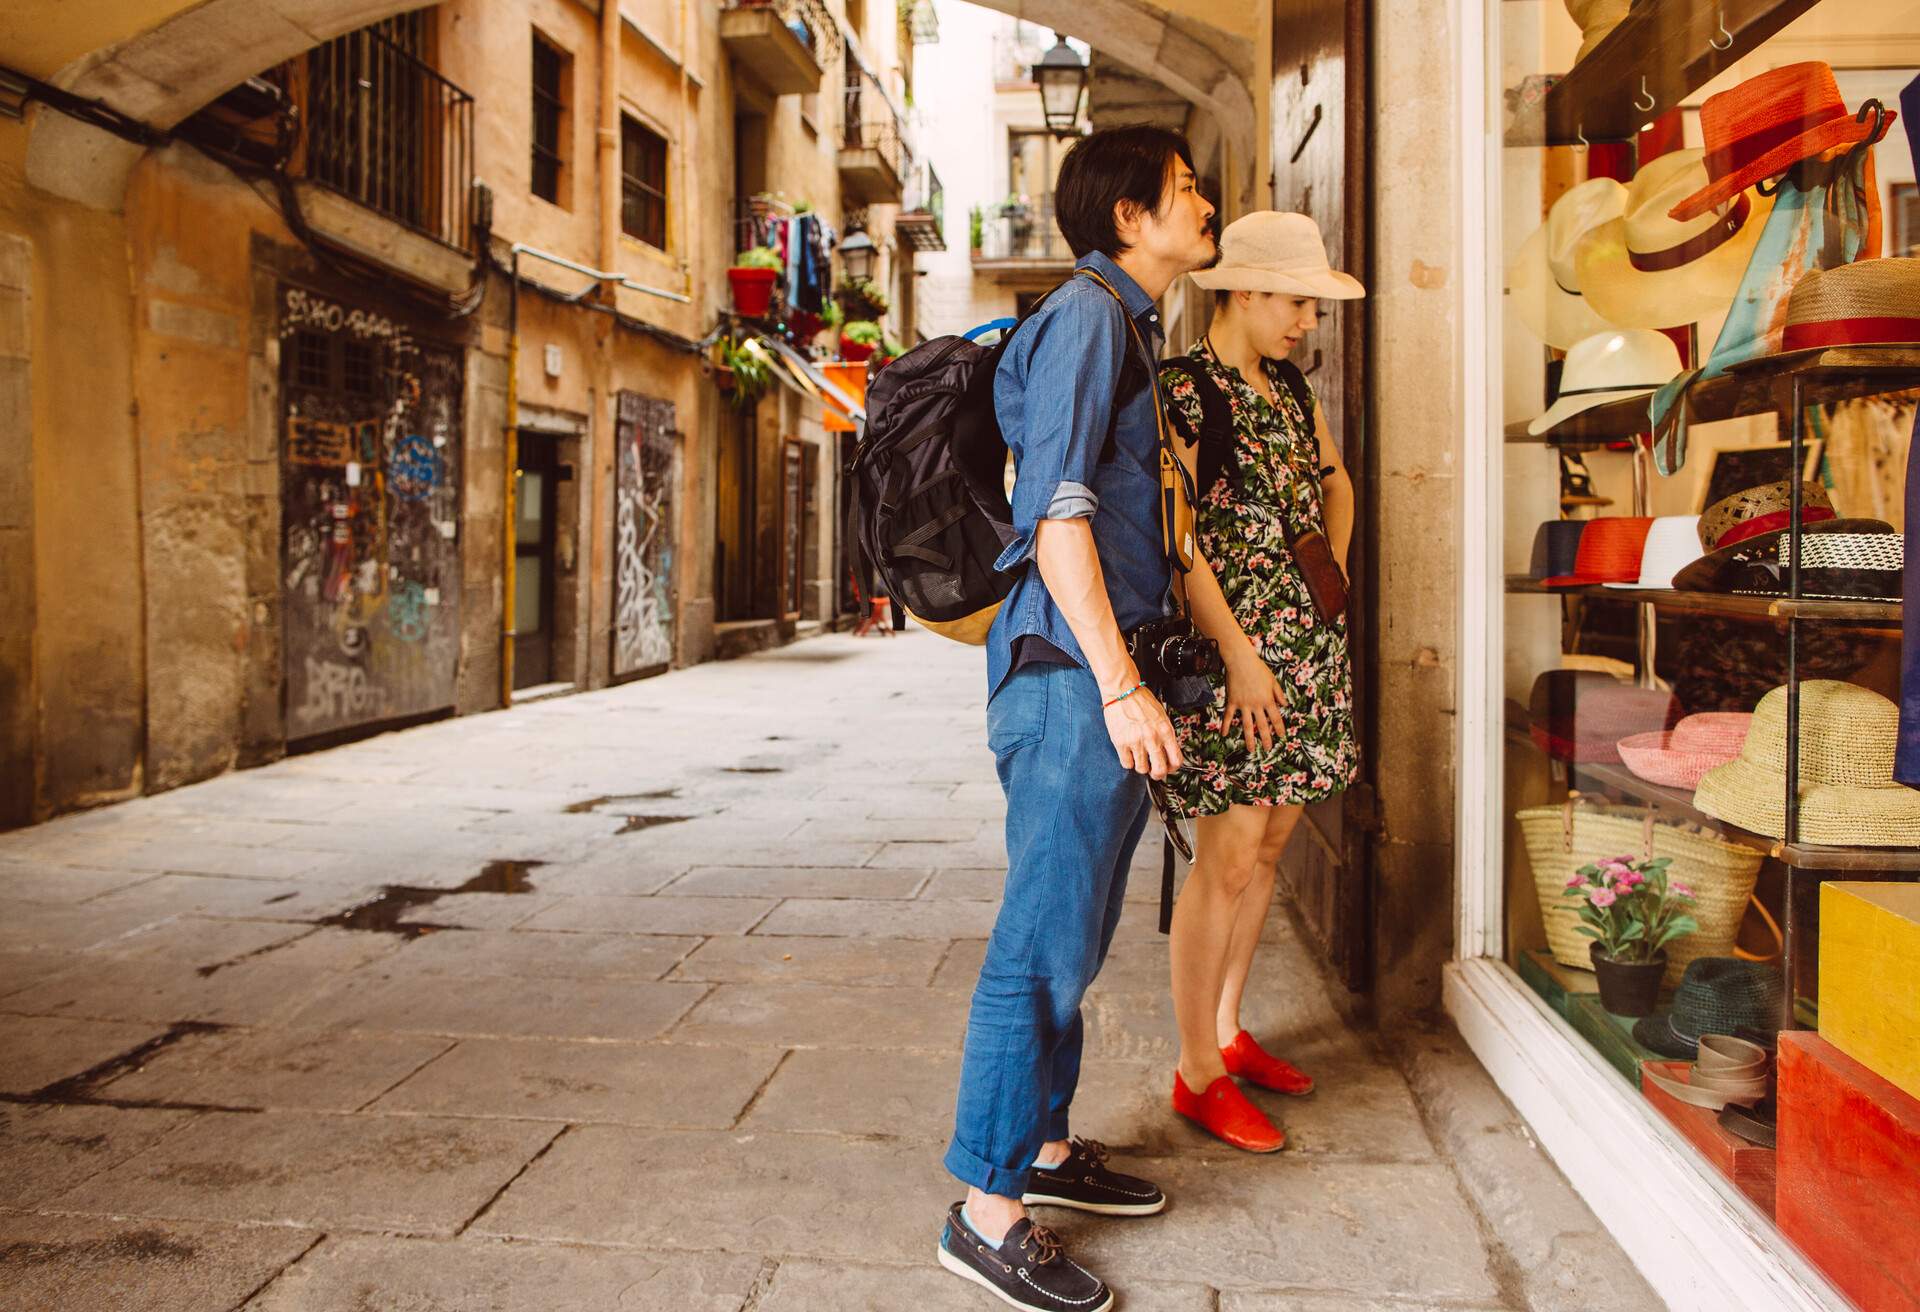 DEST_SPAIN_BARCELONA_THEME_HAT_SHOPPING_GettyImages-667663067